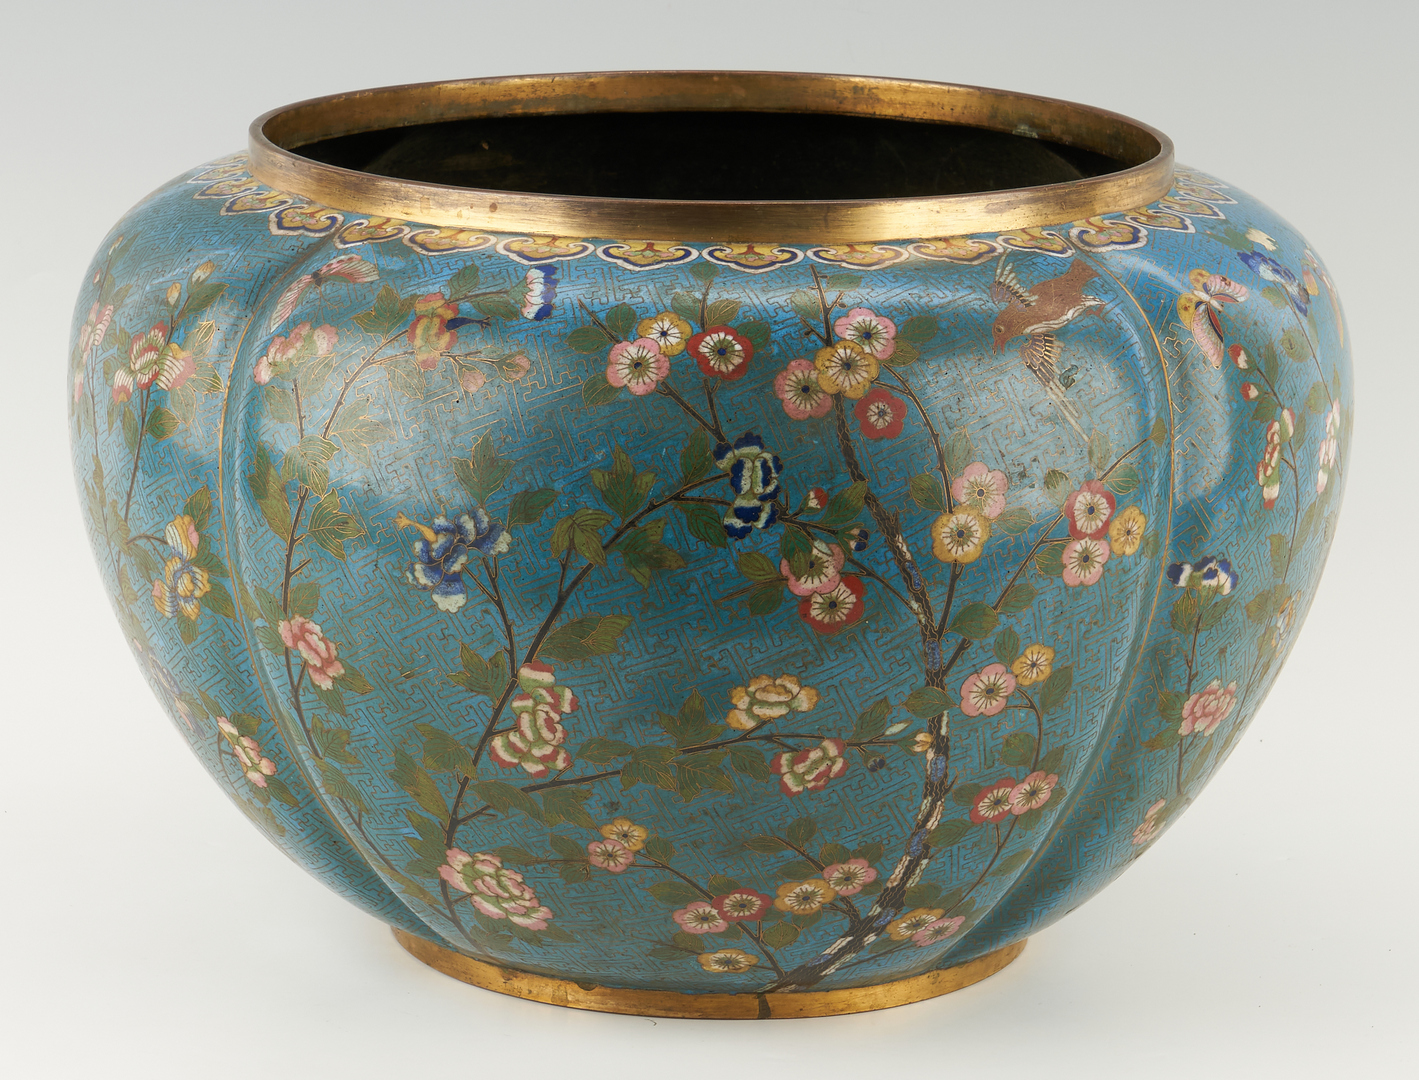 Lot 19: Large Chinese Cloisonne Jardiniere